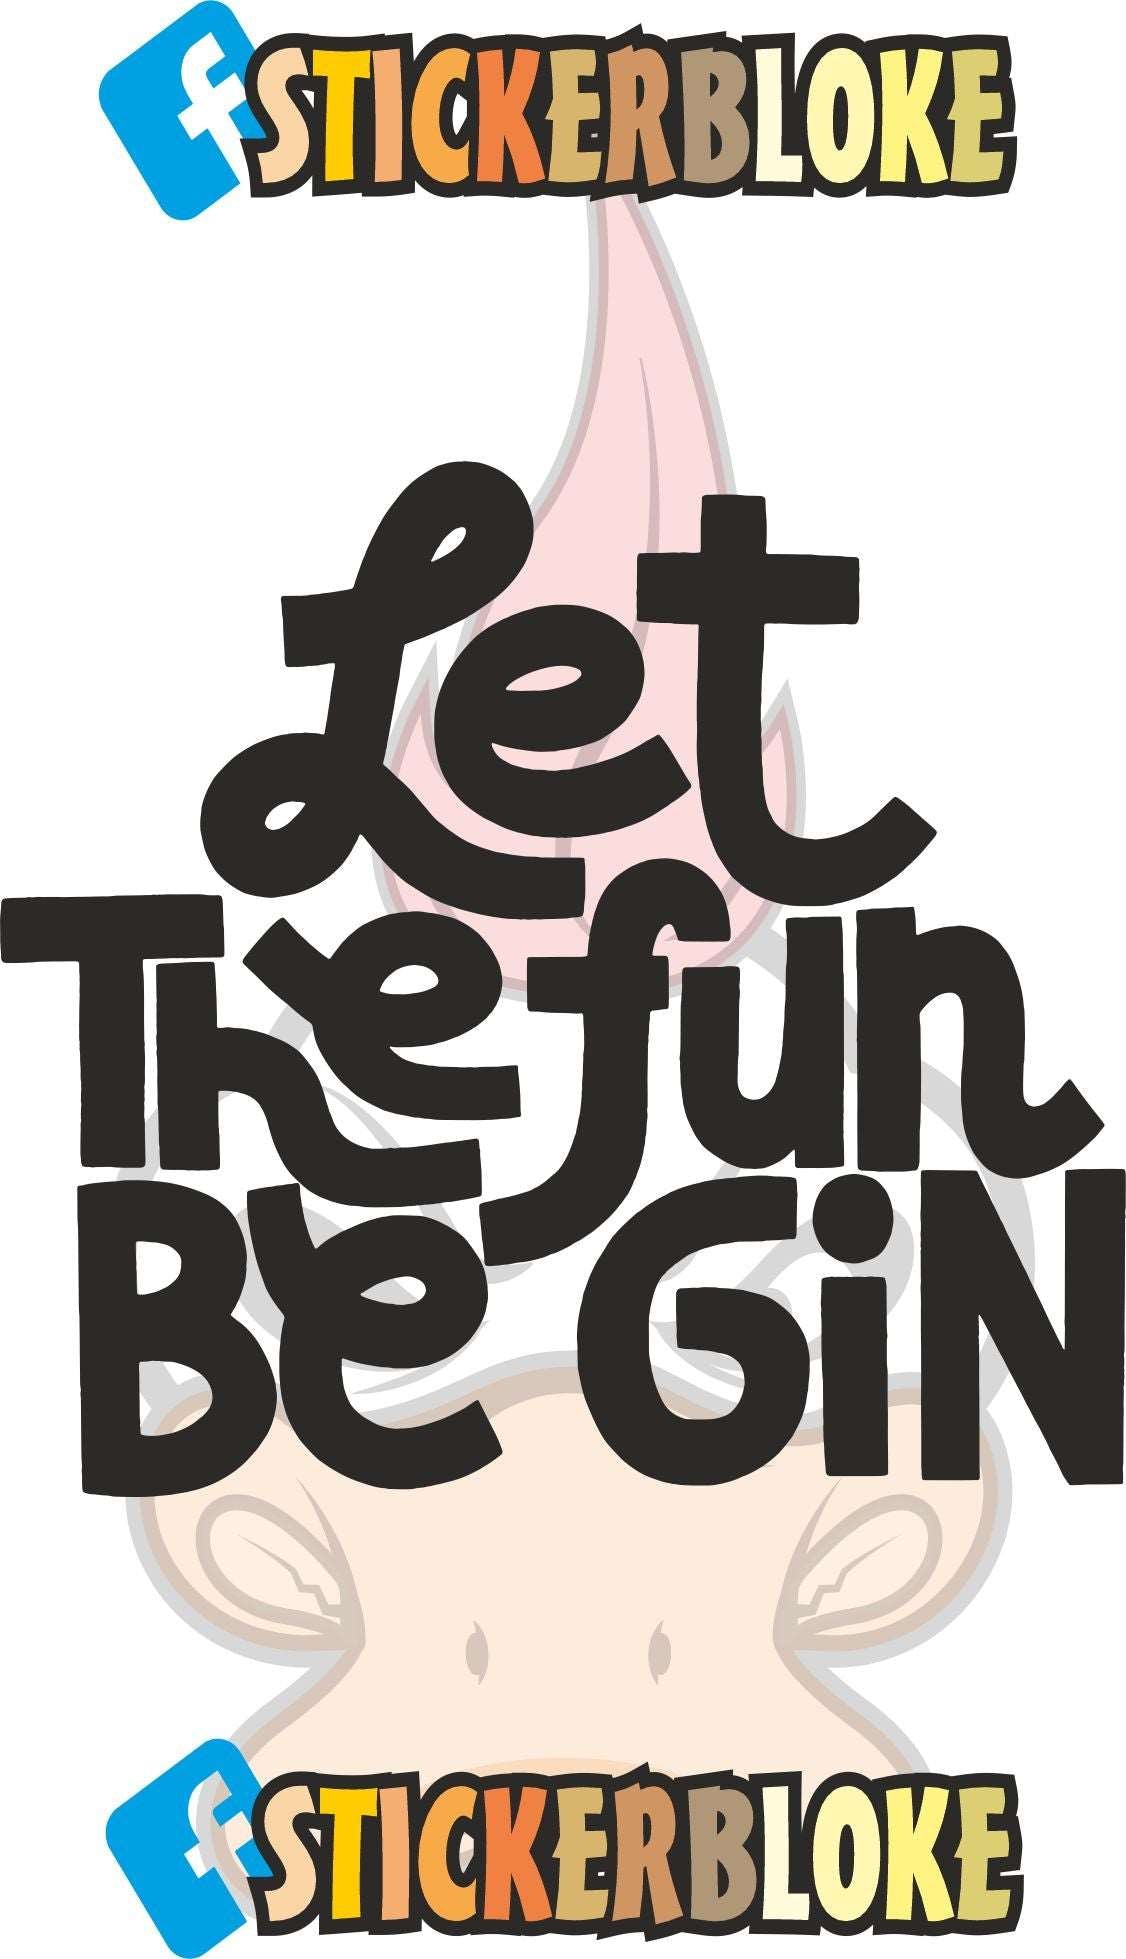 LET THE FUN BE GIN STICKER